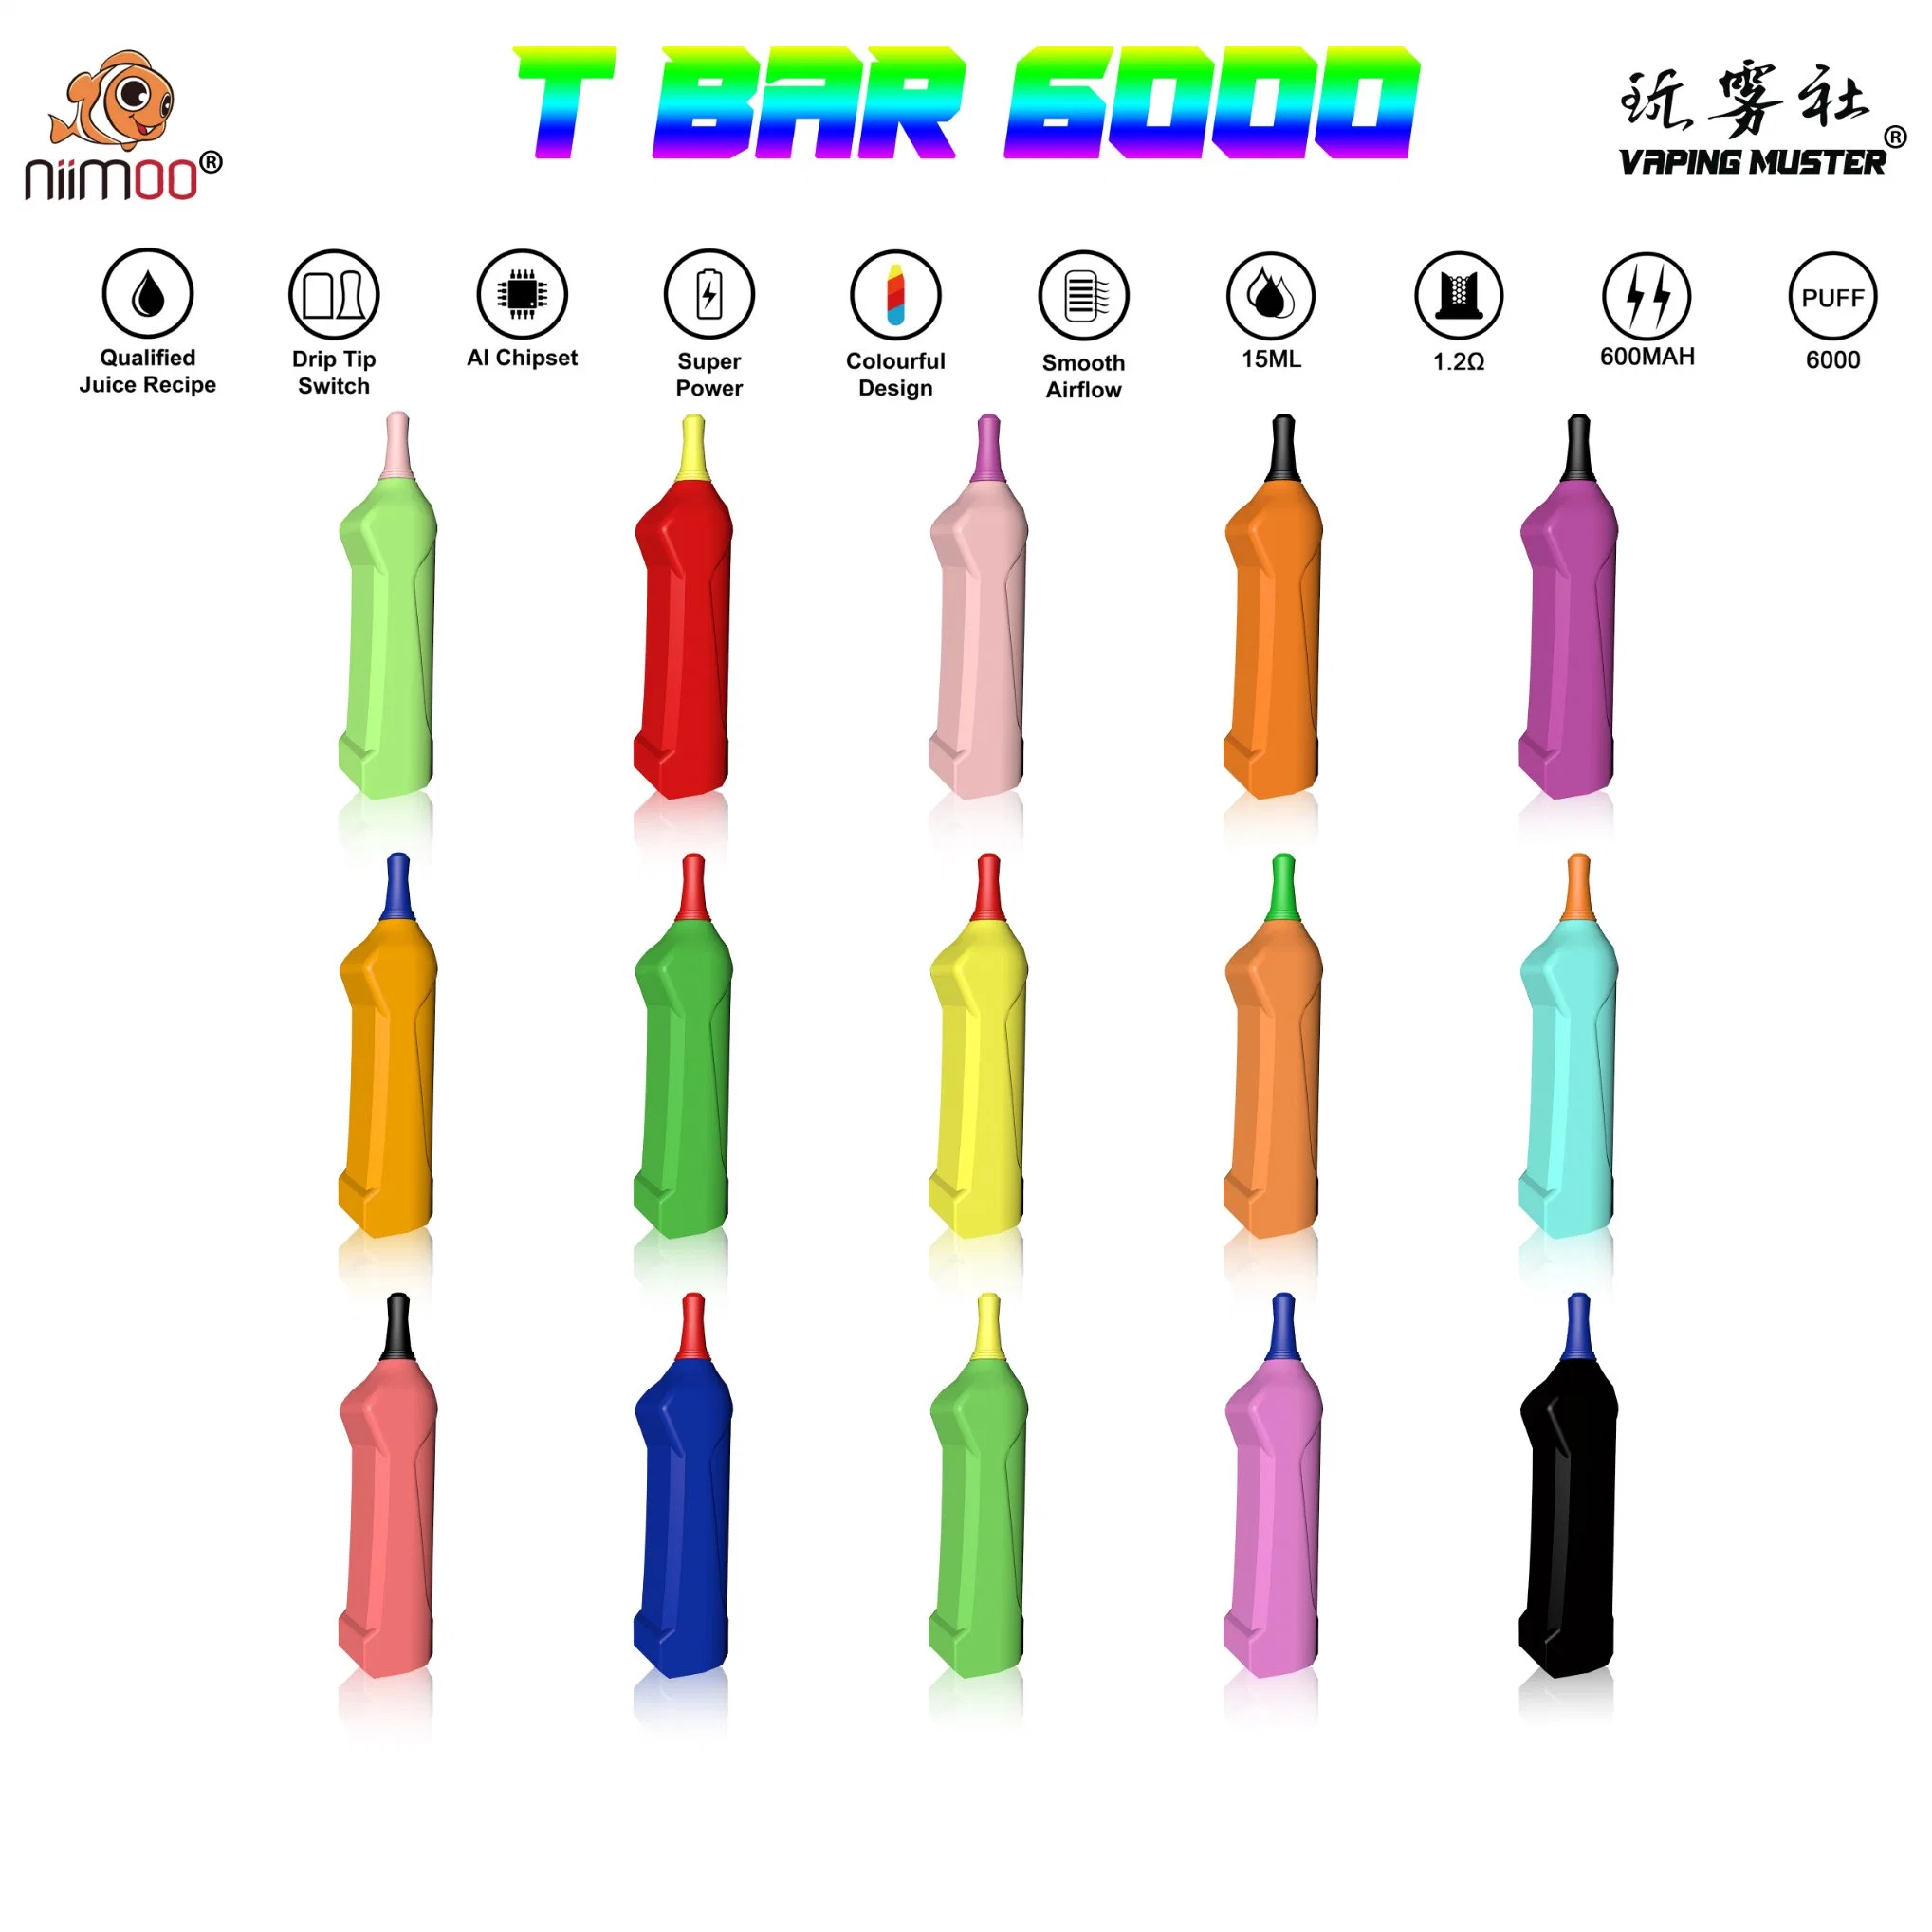 Niimoo Electronic Cigarette Cigar 15 Ml Tank Capacity Disposable/Chargeable Vapes Pen